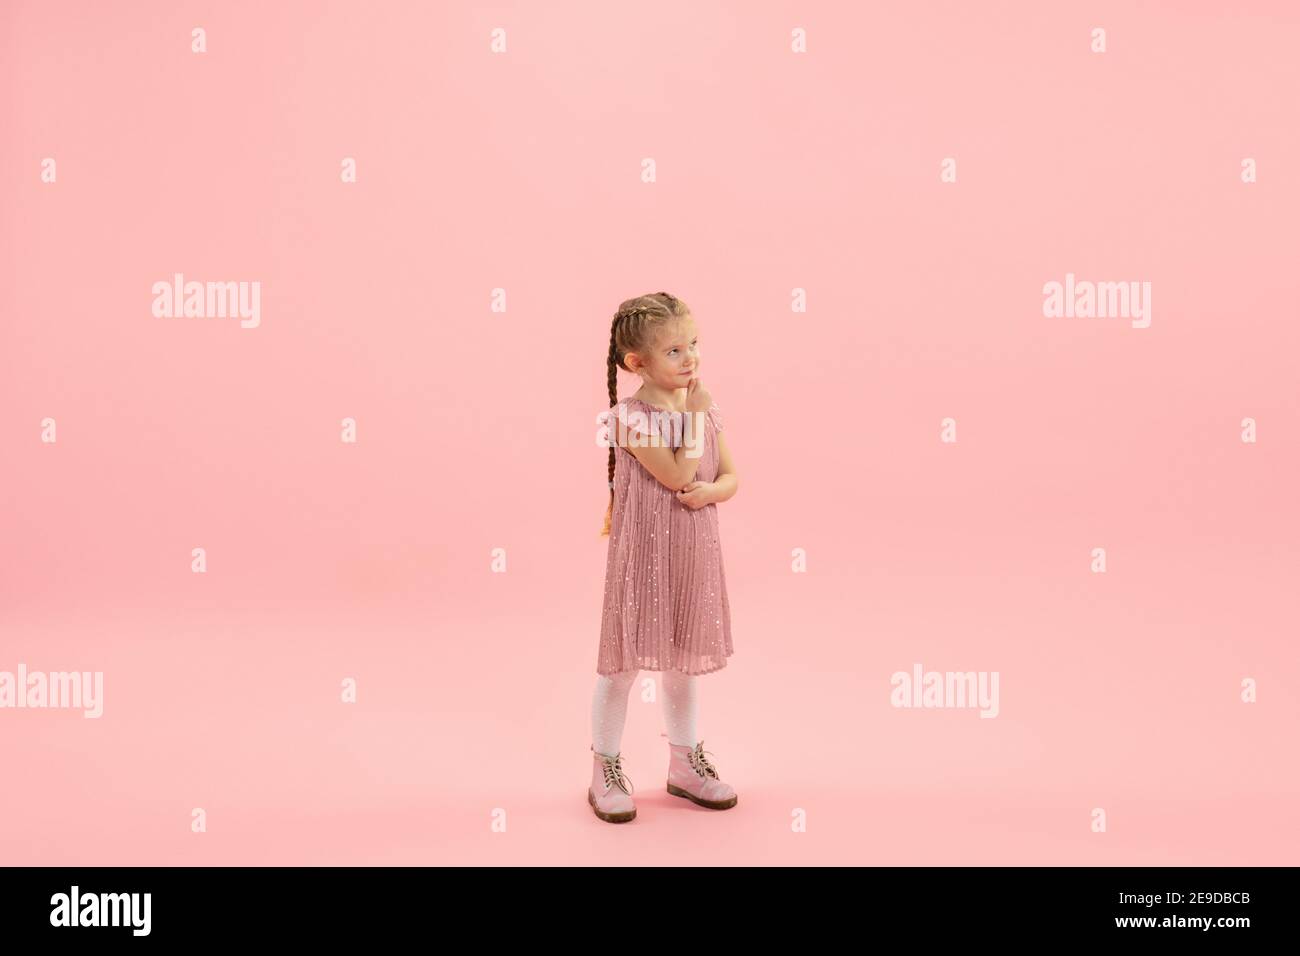 Hopeful. Childhood and dream about big and famous future. Pretty longhair girl on coral pink studio background. Childhood, dreams, imagination, education, facial expression, emotions concept. Stock Photo